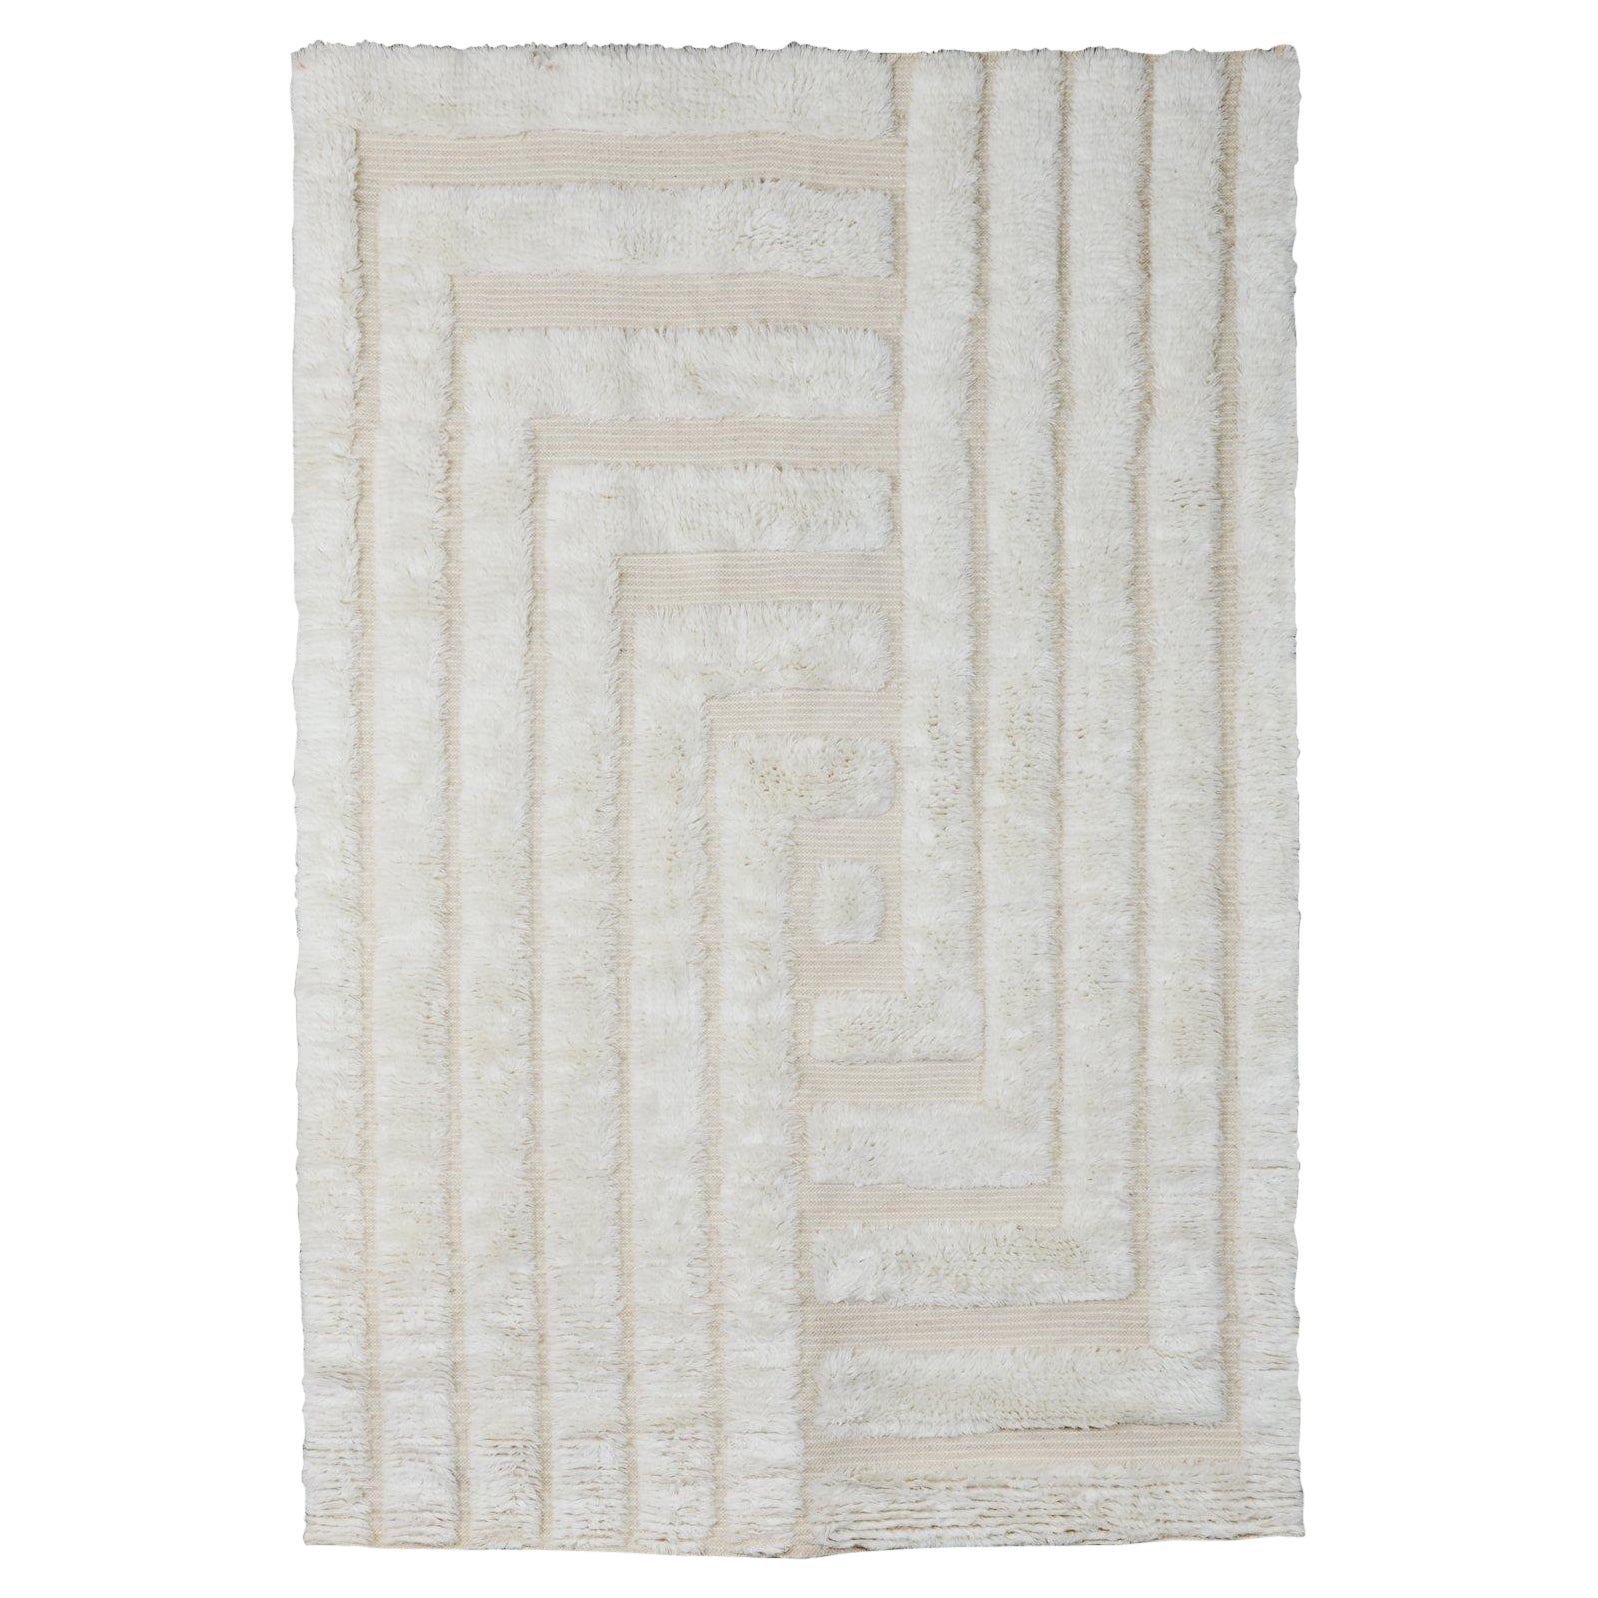 Handwoven Shaggy Labyrinth Wool Rug White Large